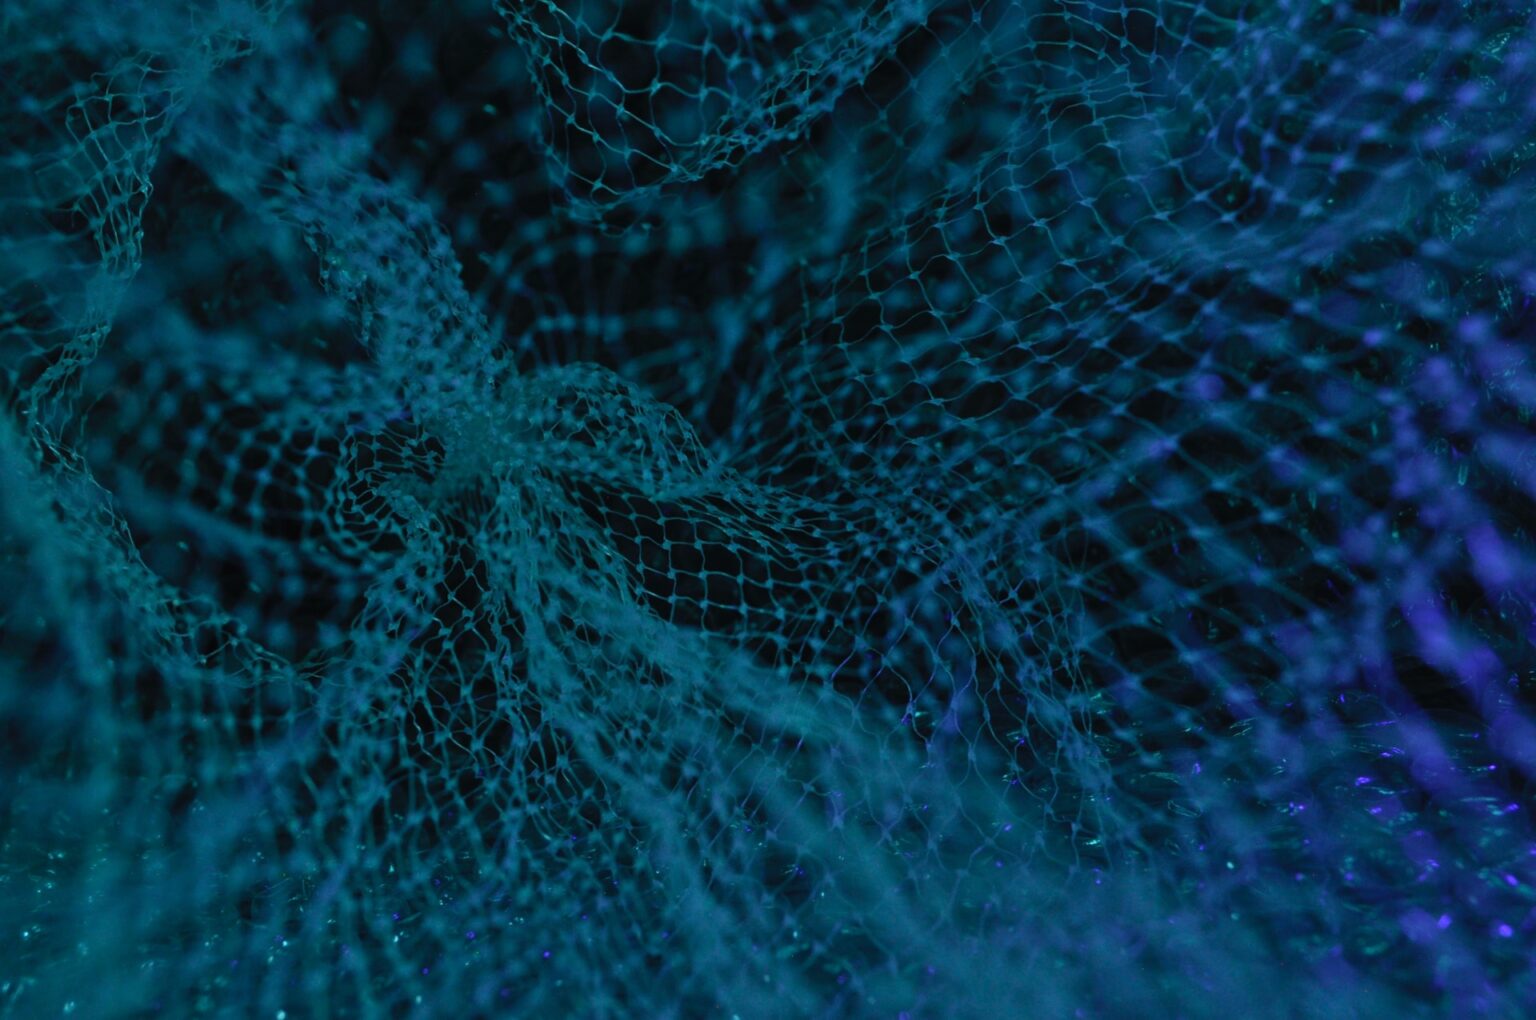 Generic image of a LIDAR scan of a fishing net